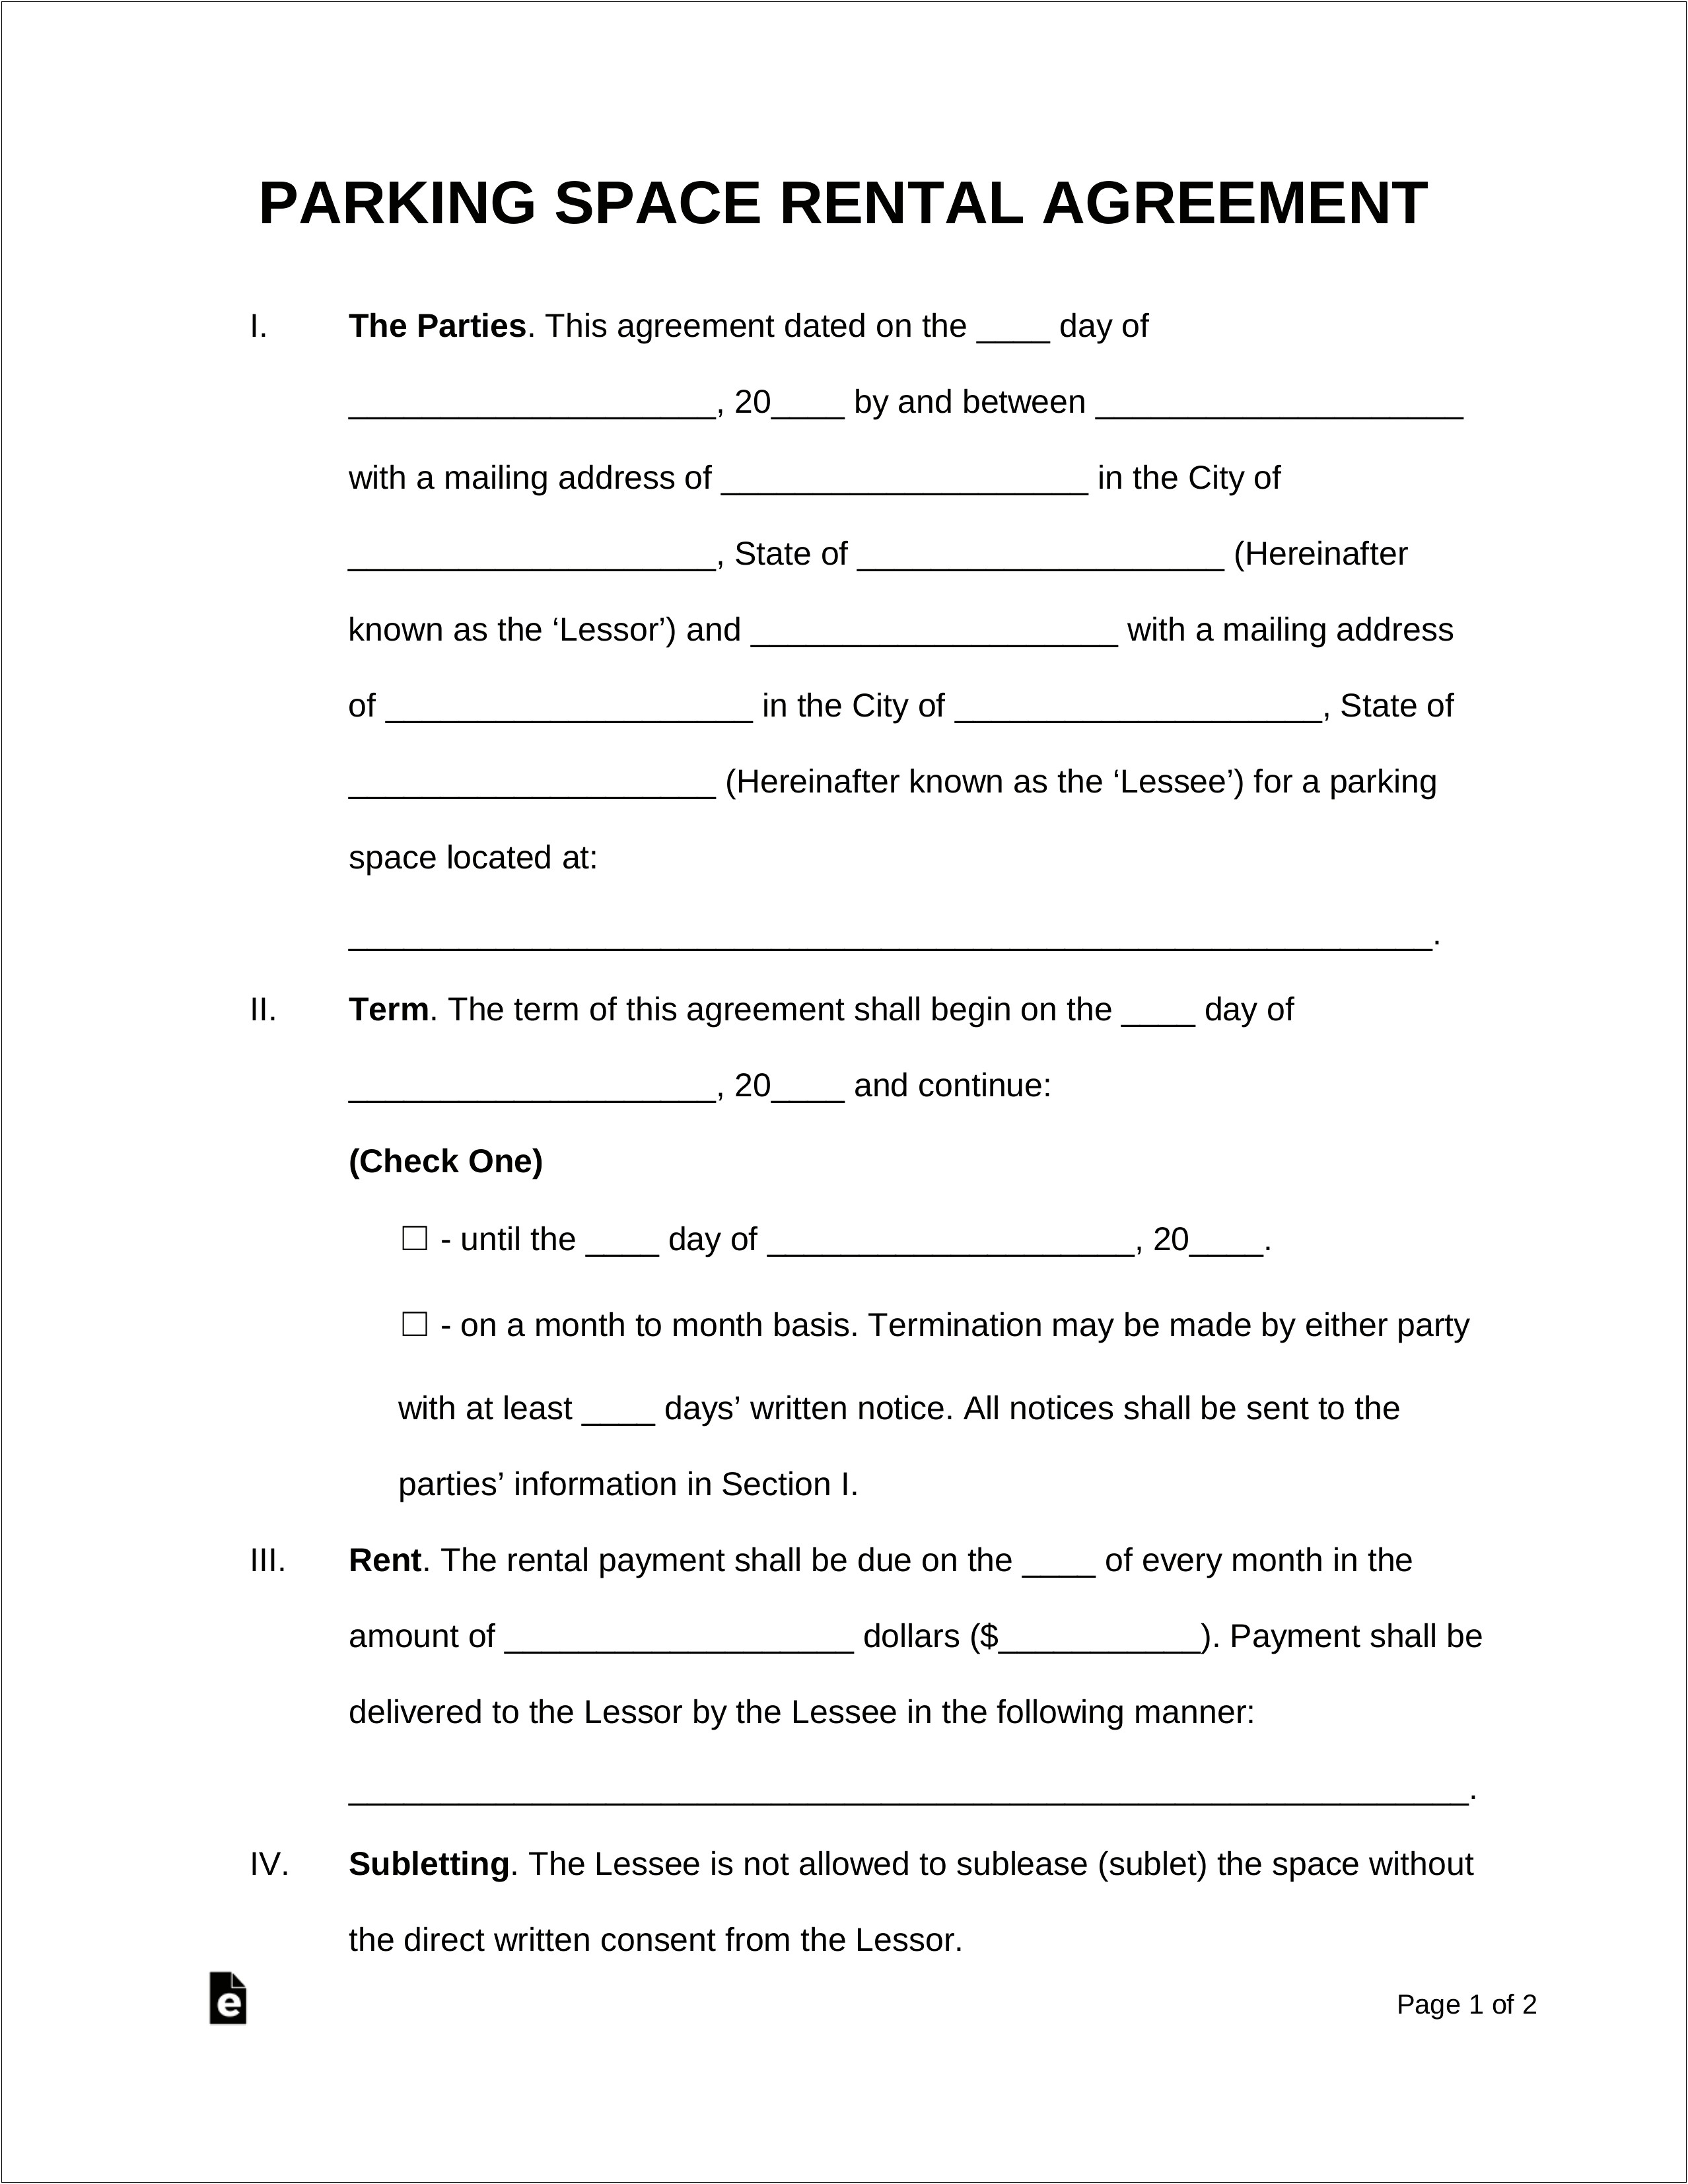 Free Motor Vehicle Lease Agreement Template